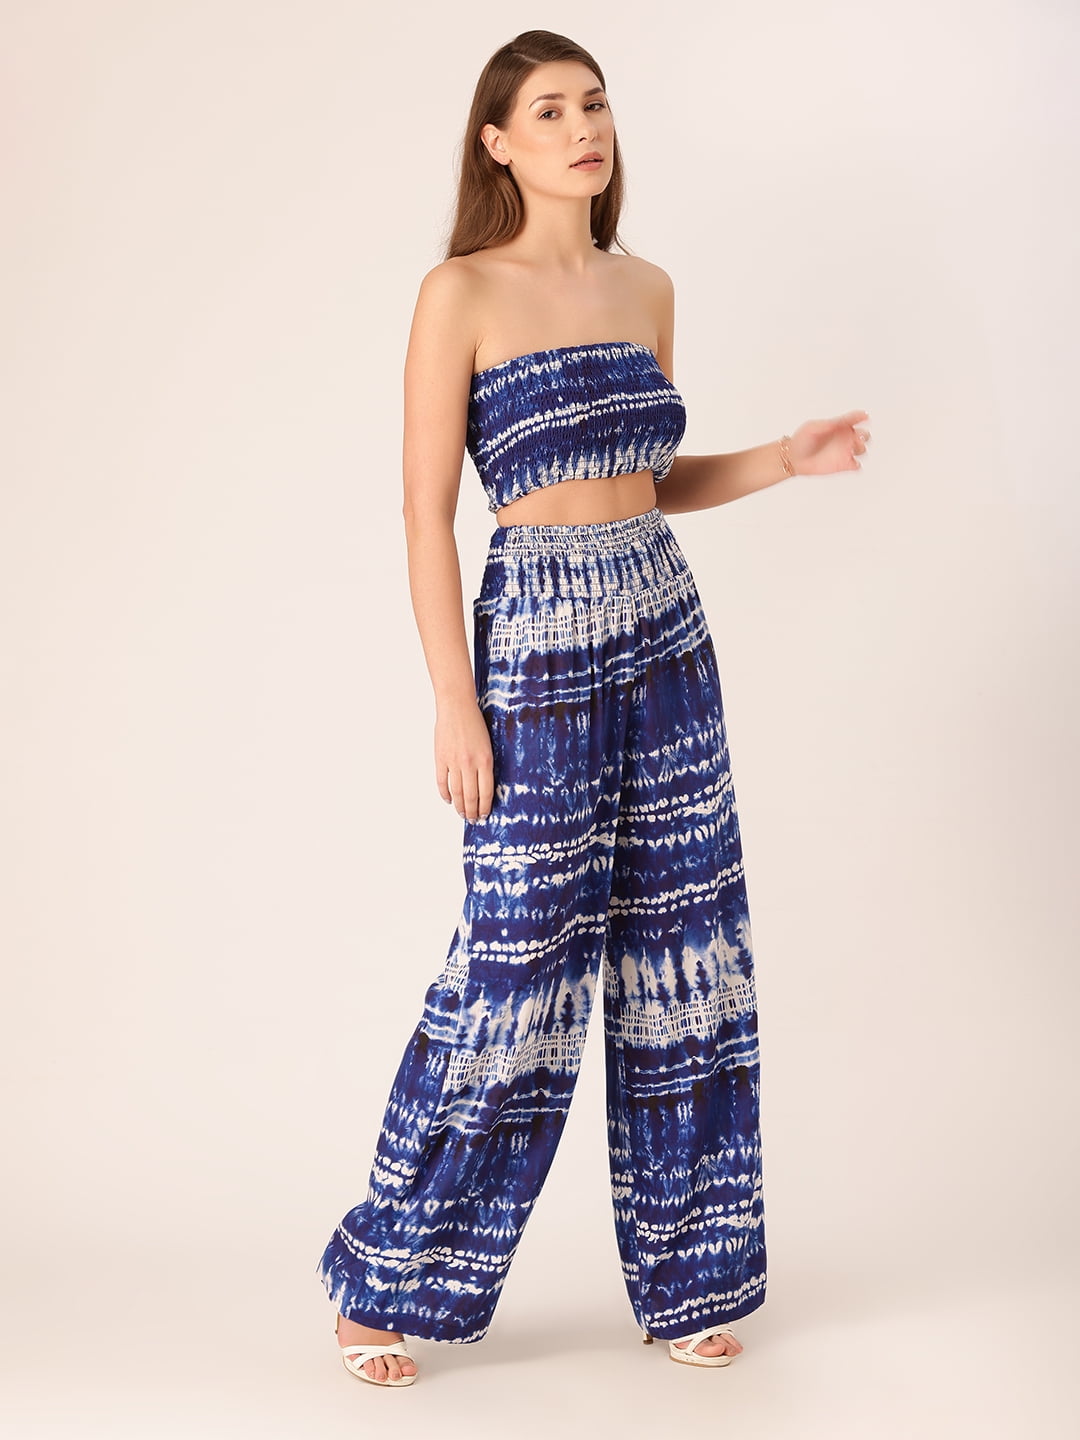 DressBerry Women's Printed Viscose Rayon Tube Top and Pants 2 PC Co-ord Set  Tube Top Long Palazzo Pants Elastic Waist Casual Summer Wear Light  Weighted Top Bottom Party Wear Set 